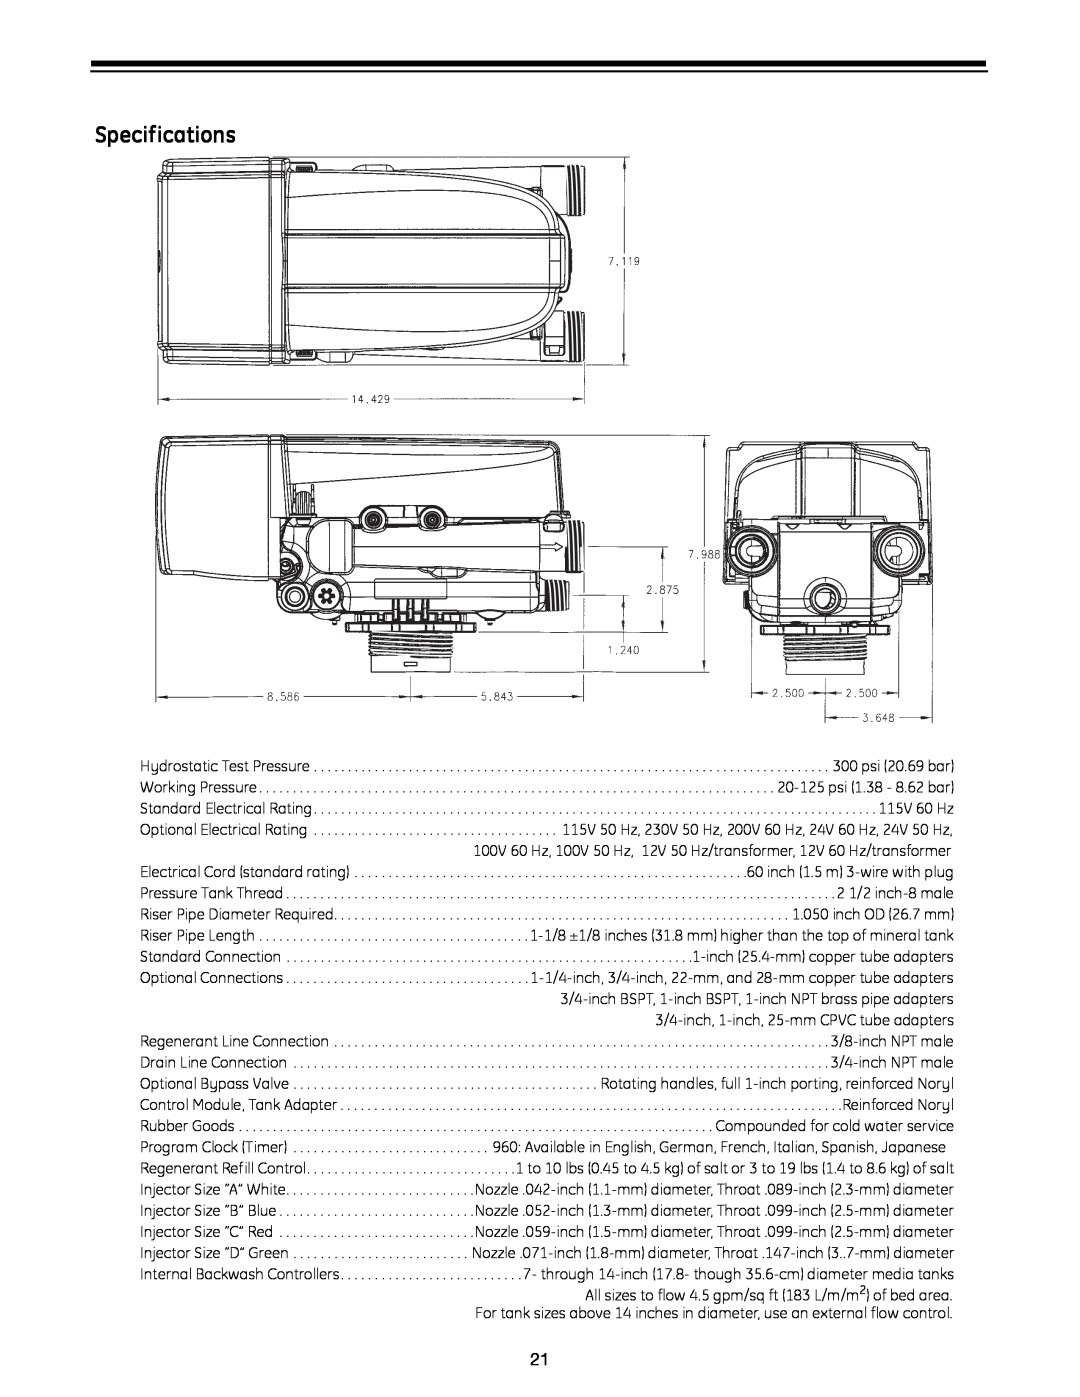 GE 960 Series manual Specifications 